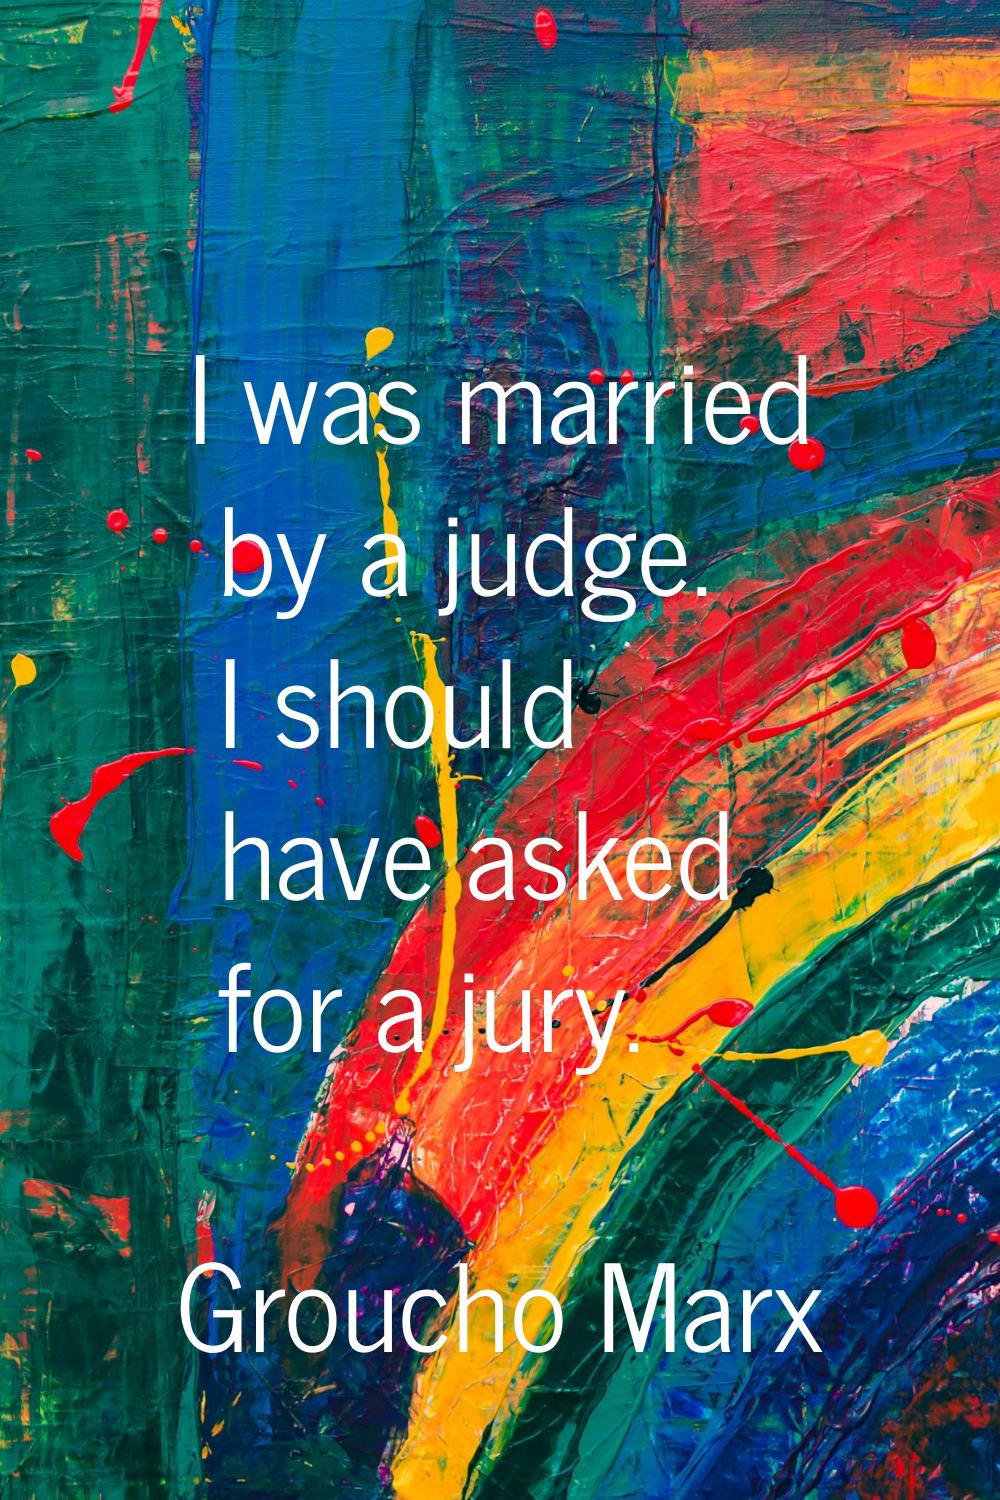 I was married by a judge. I should have asked for a jury.